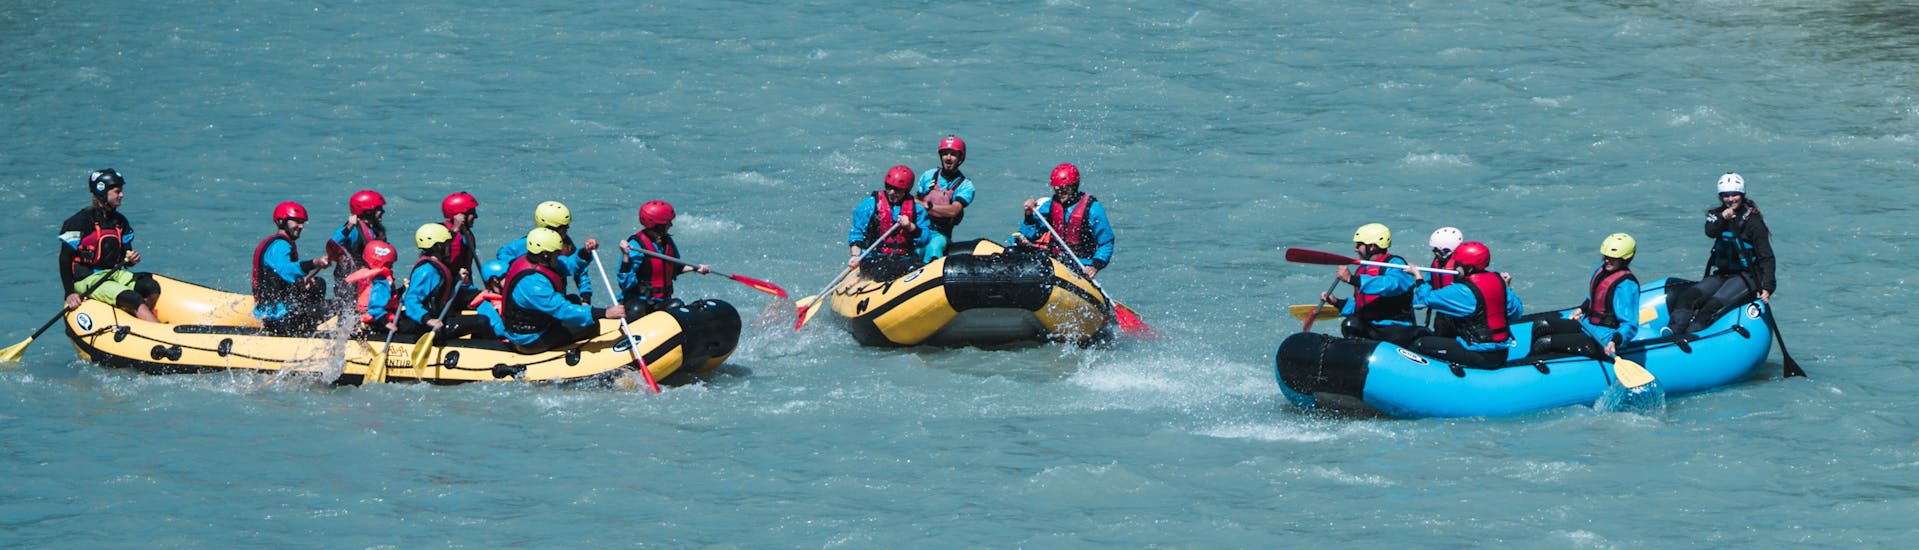 Everyone is giving their best during the Rafting on the Adige in Val Venosta - Homerun Tour with Adventure Südtirol.